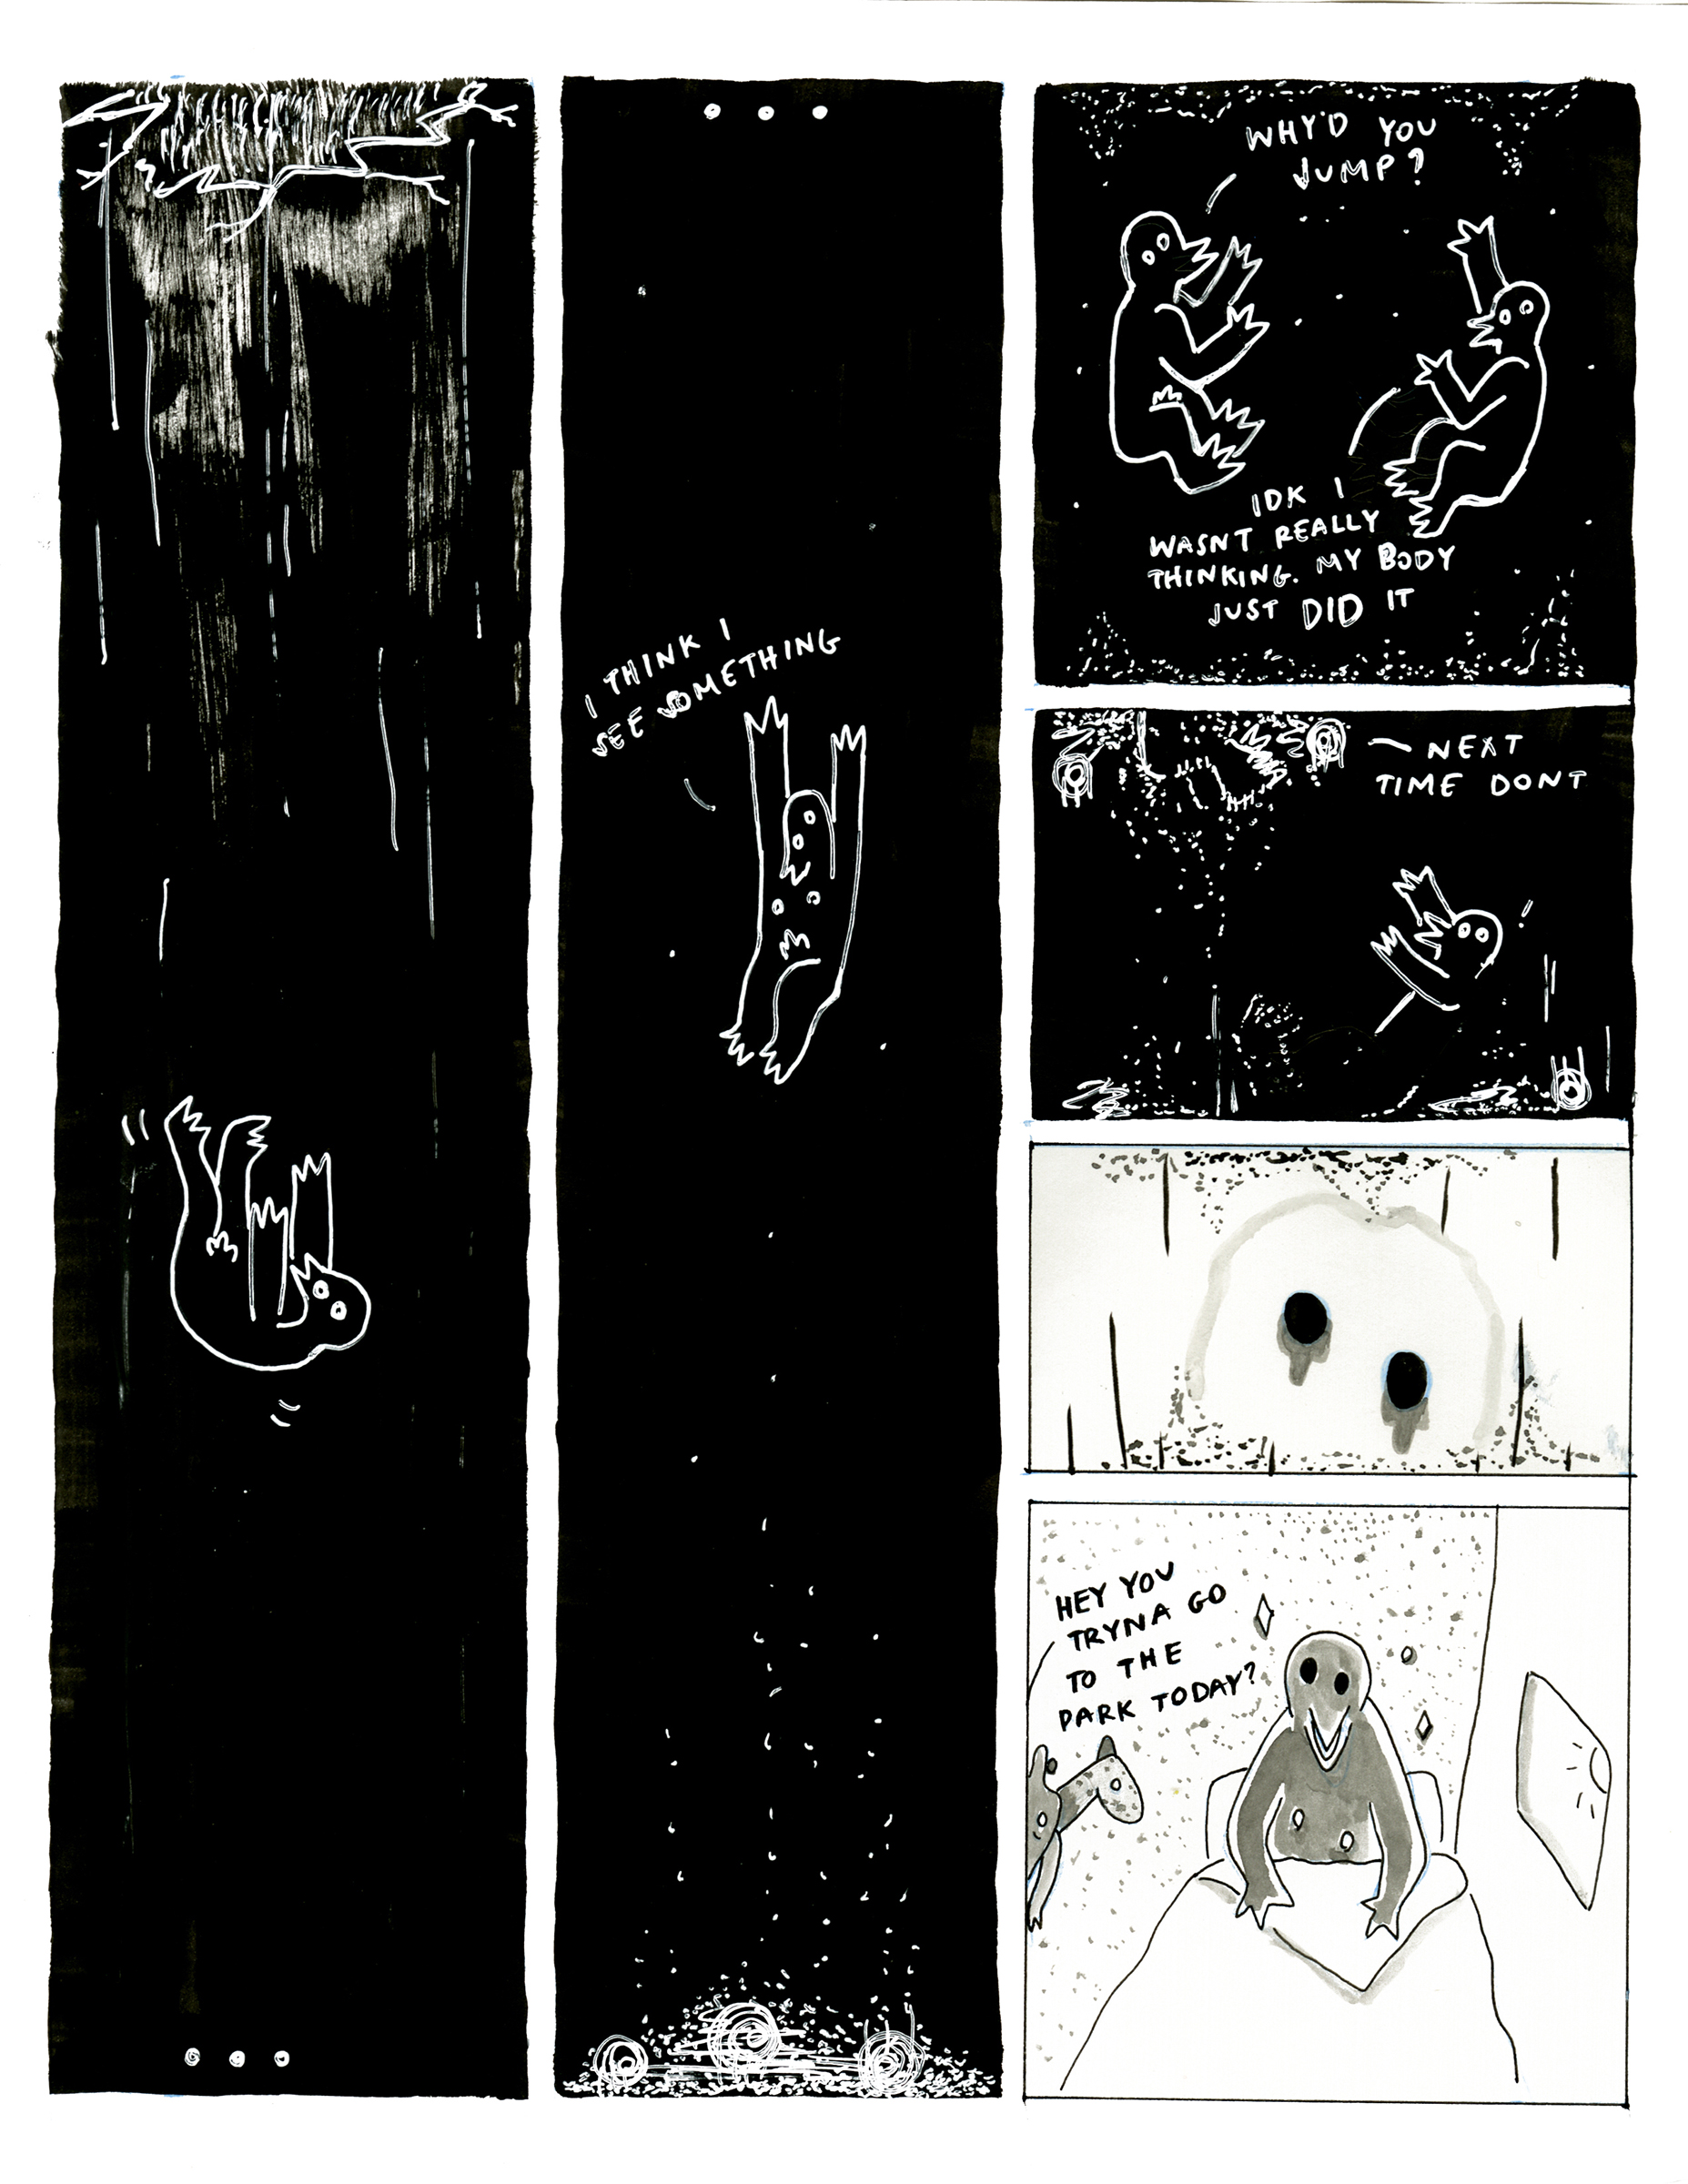 Have a Good Day Today Part 2, ink comic by Paulina Eguino.